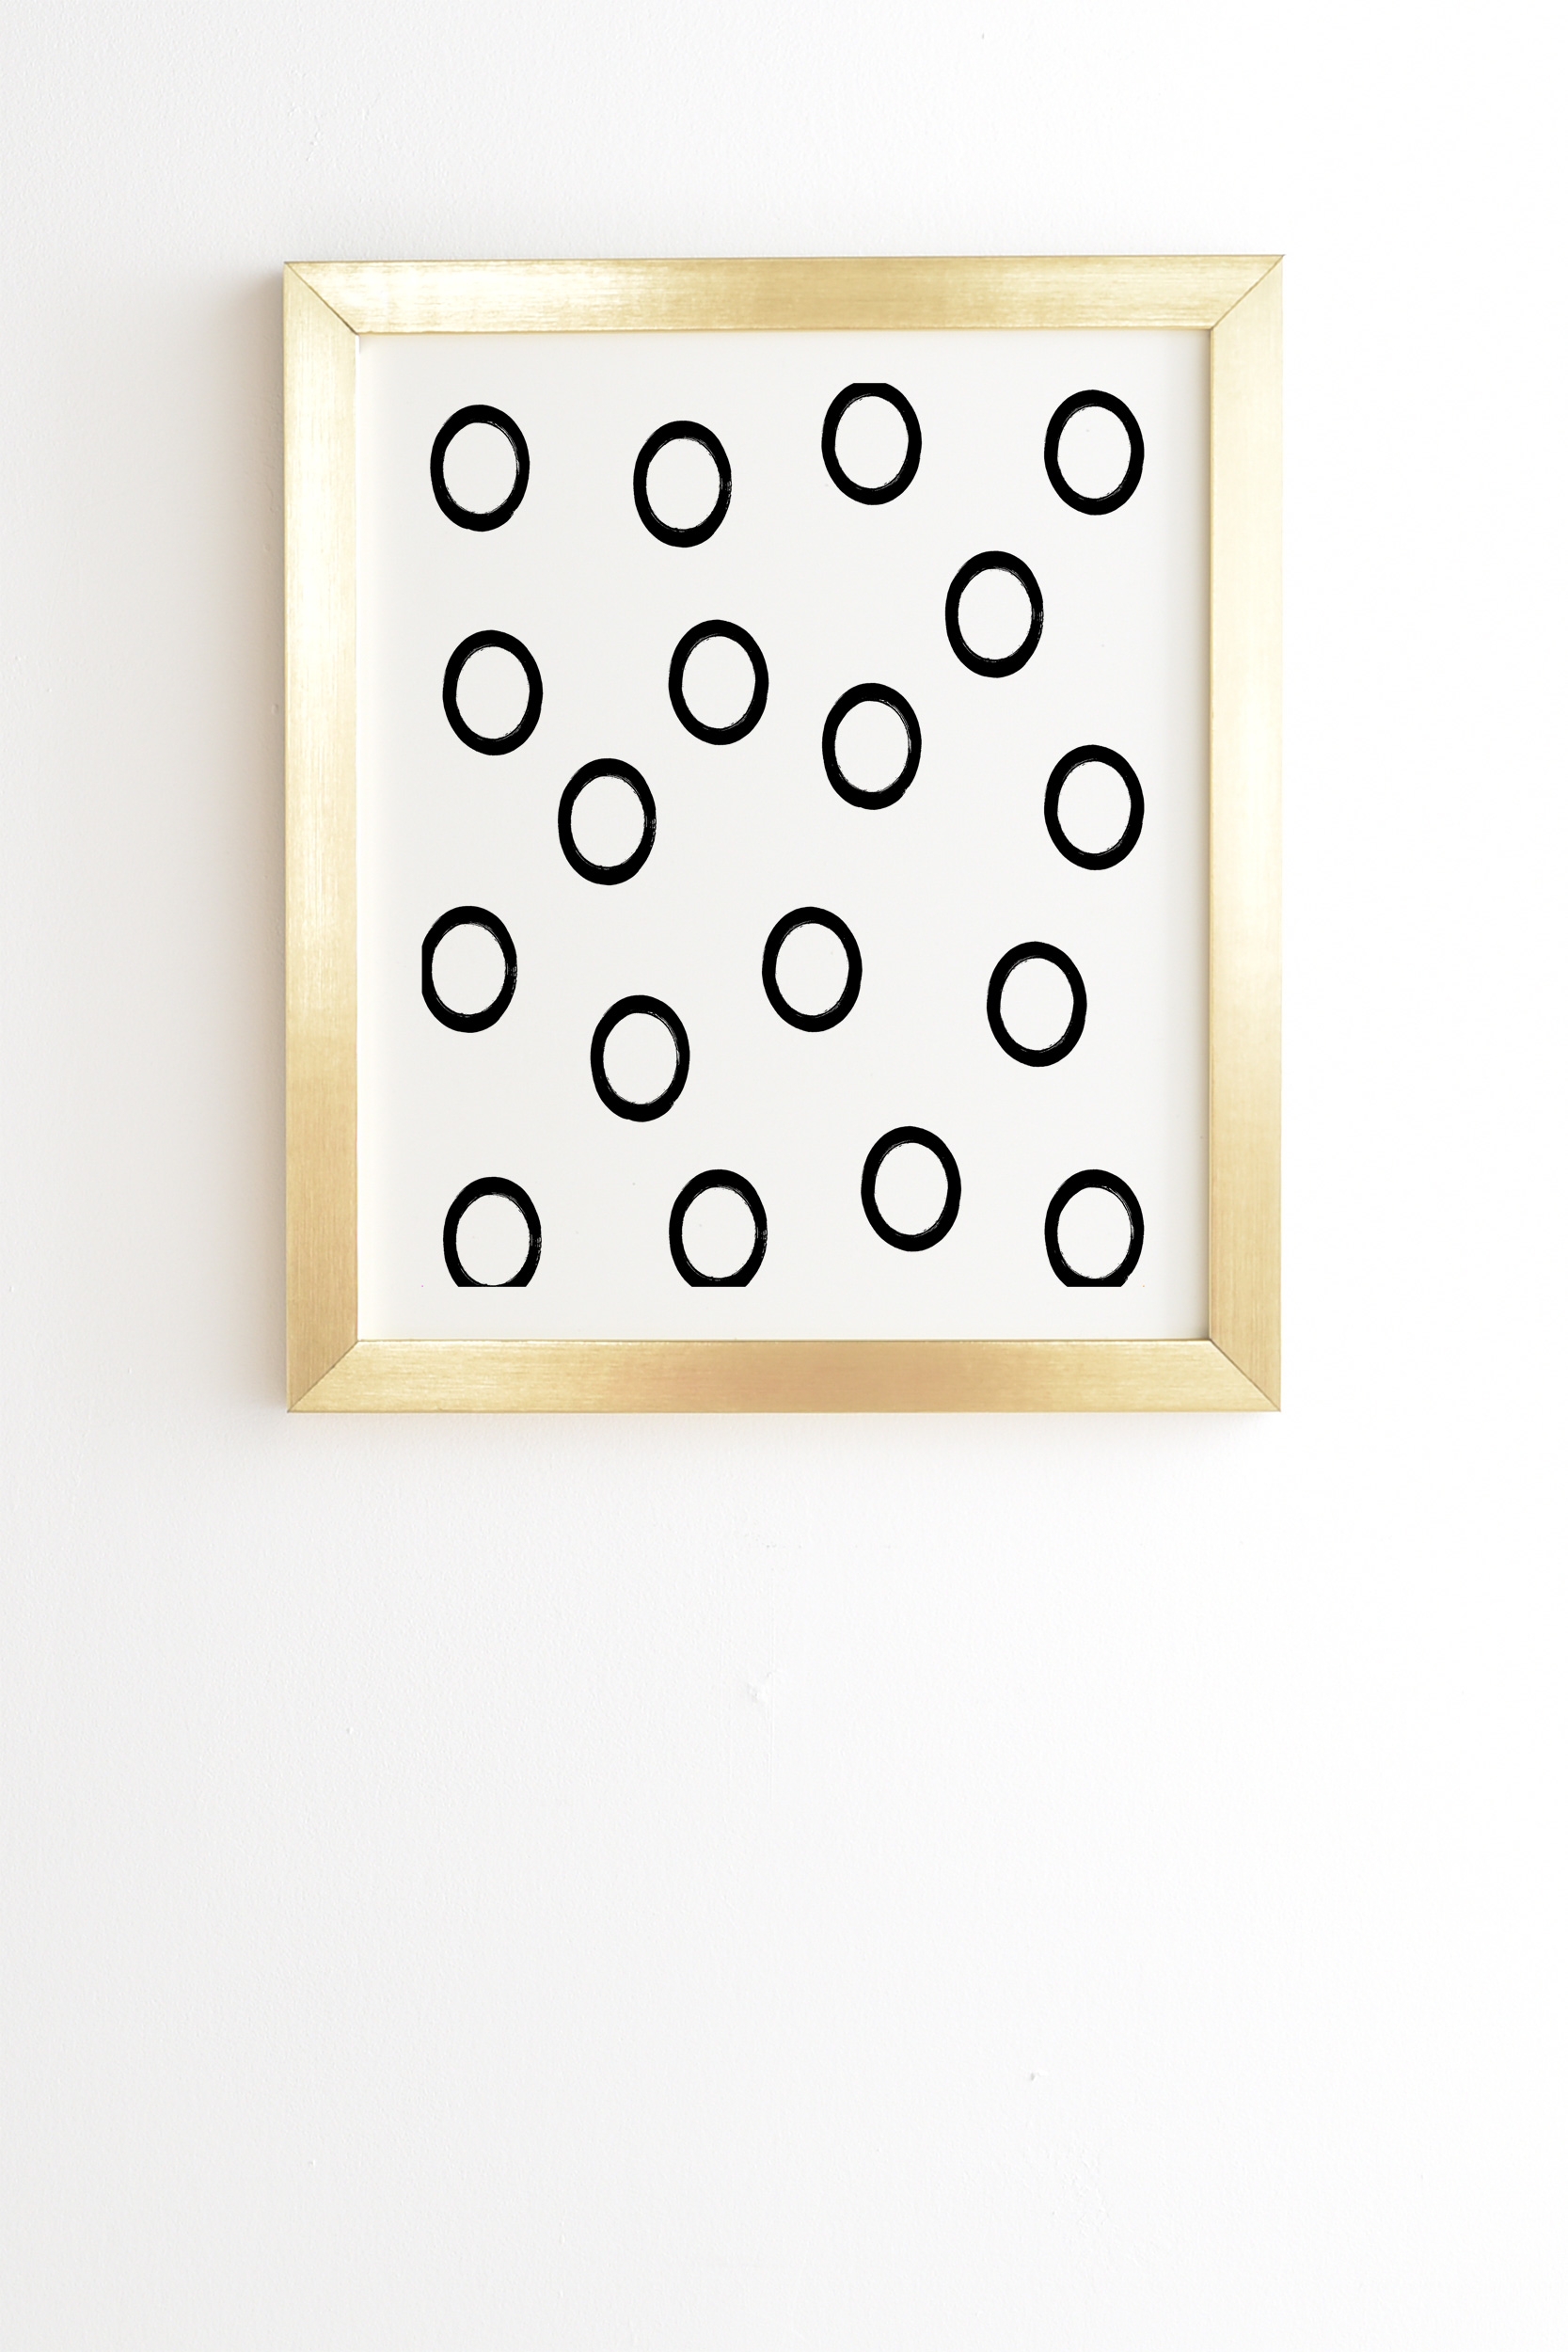 Monochrome Circles V2 by Kelly Haines - Framed Wall Art Basic Gold 11" x 13" - Image 0